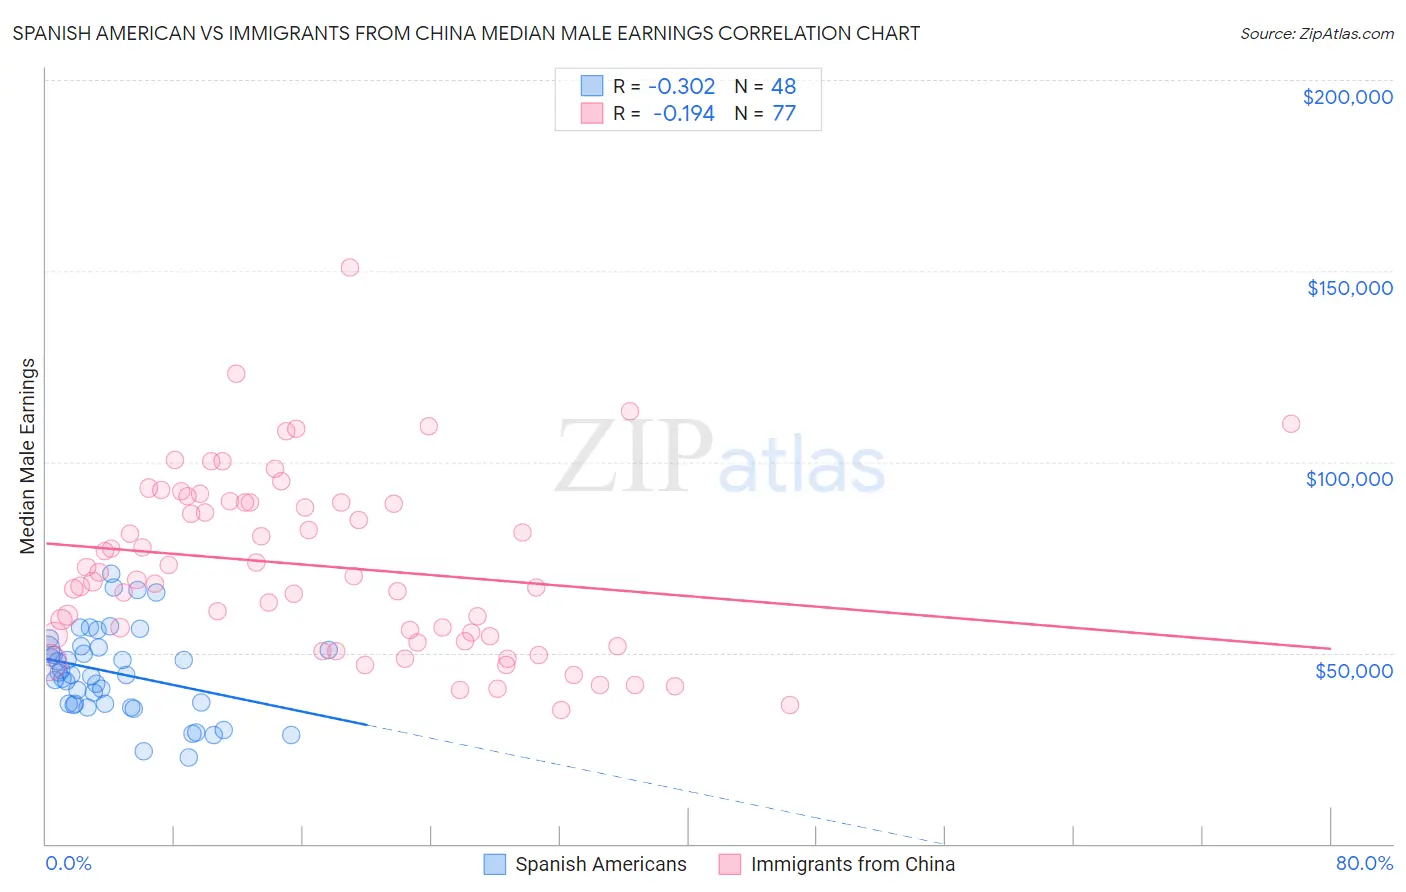 Spanish American vs Immigrants from China Median Male Earnings